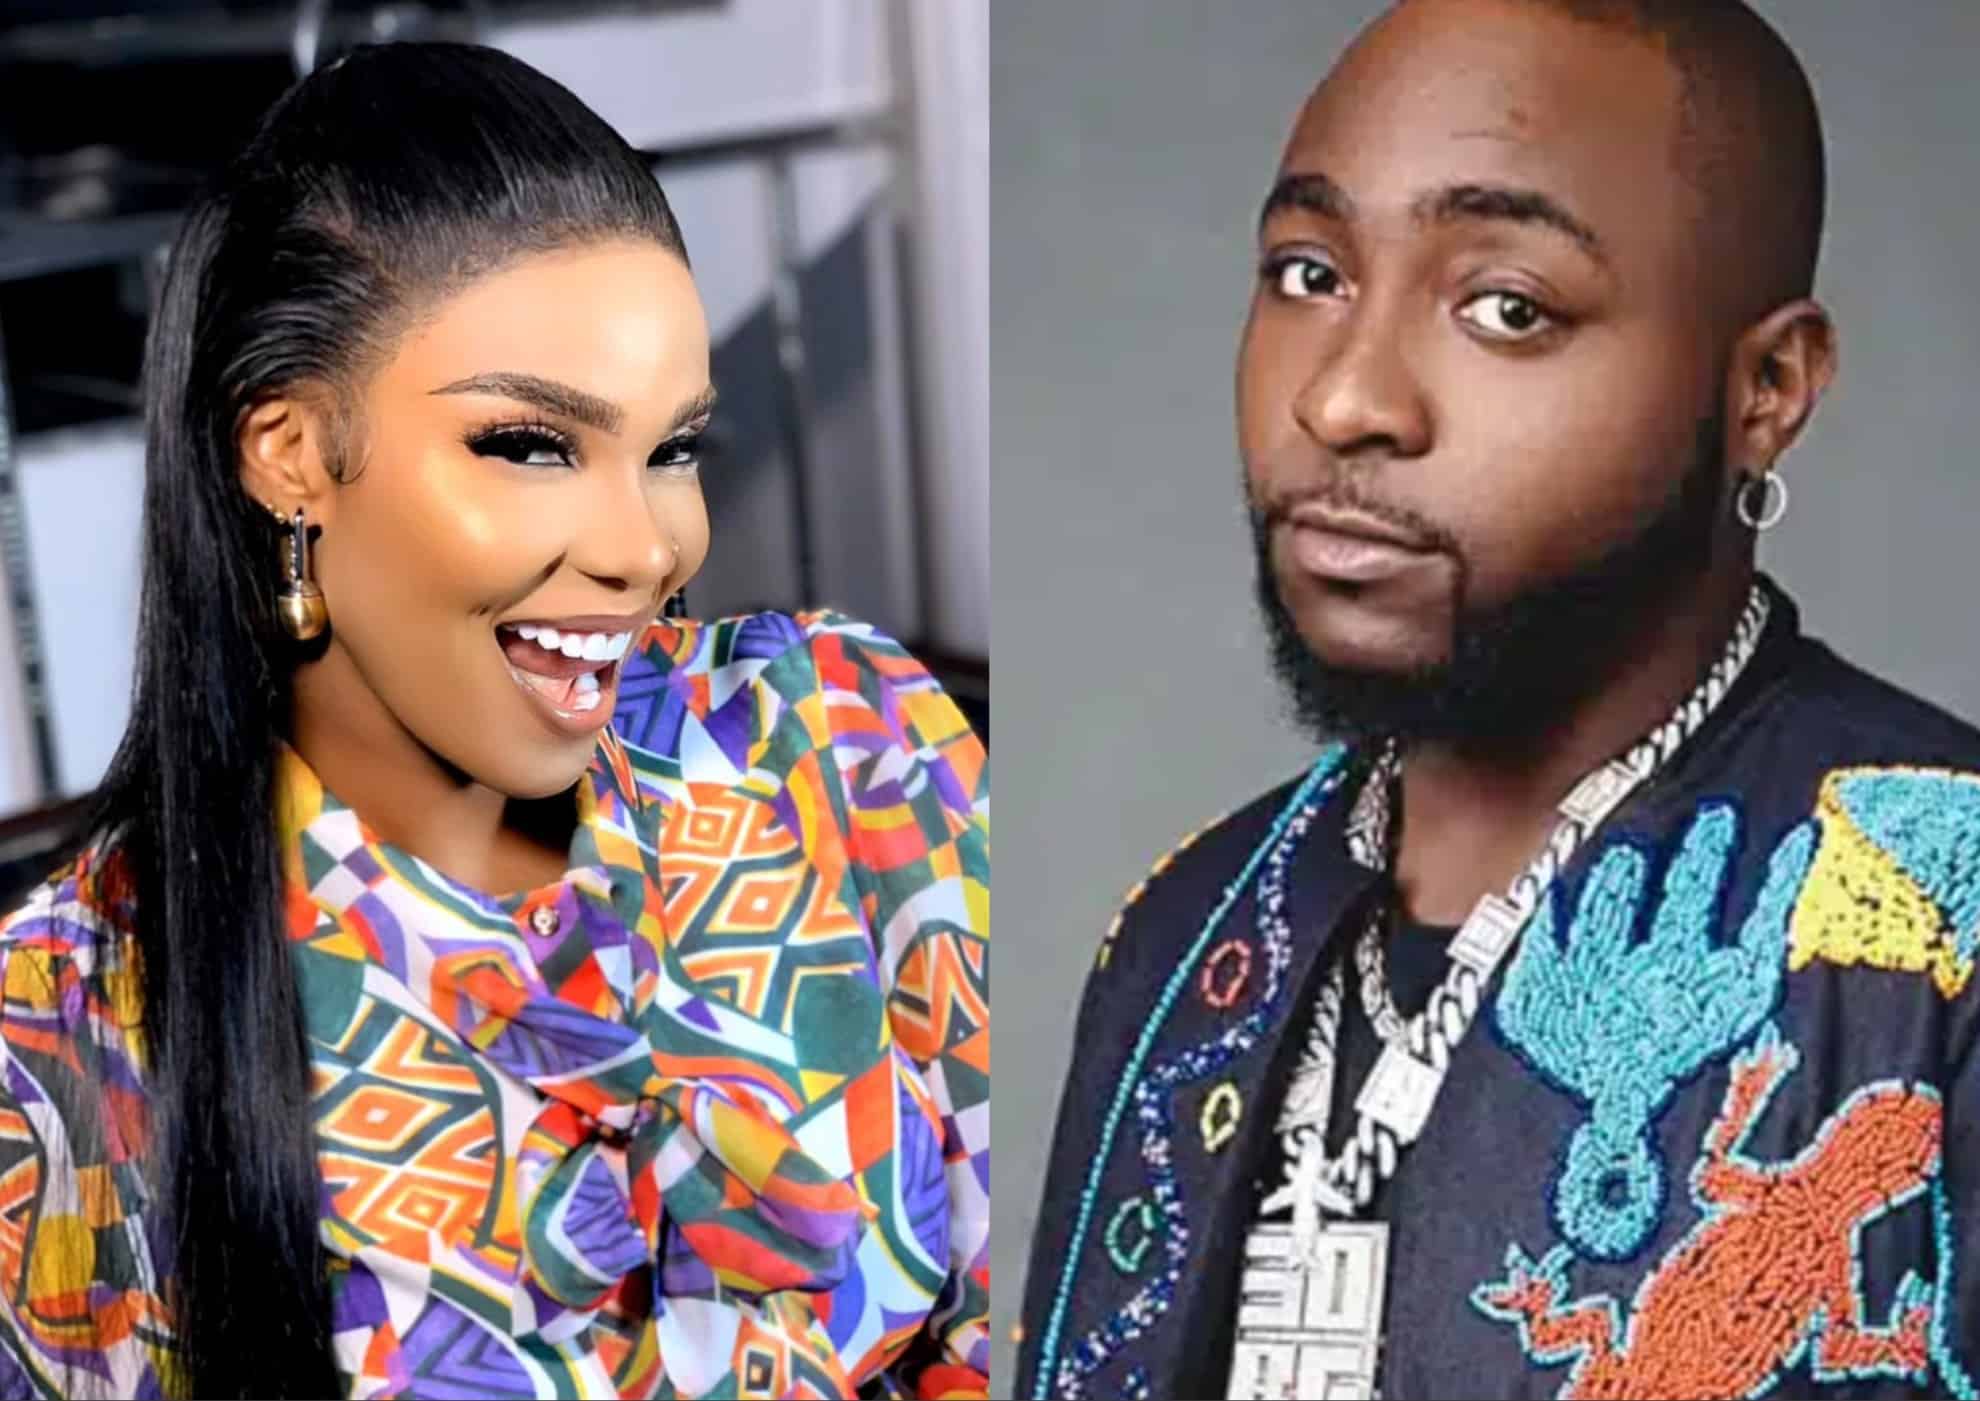 'Men That Cannot Control Their 'Stick' Lack Self Control' - Iyabo Ojo Reacts To Davido's Cheating Scandal